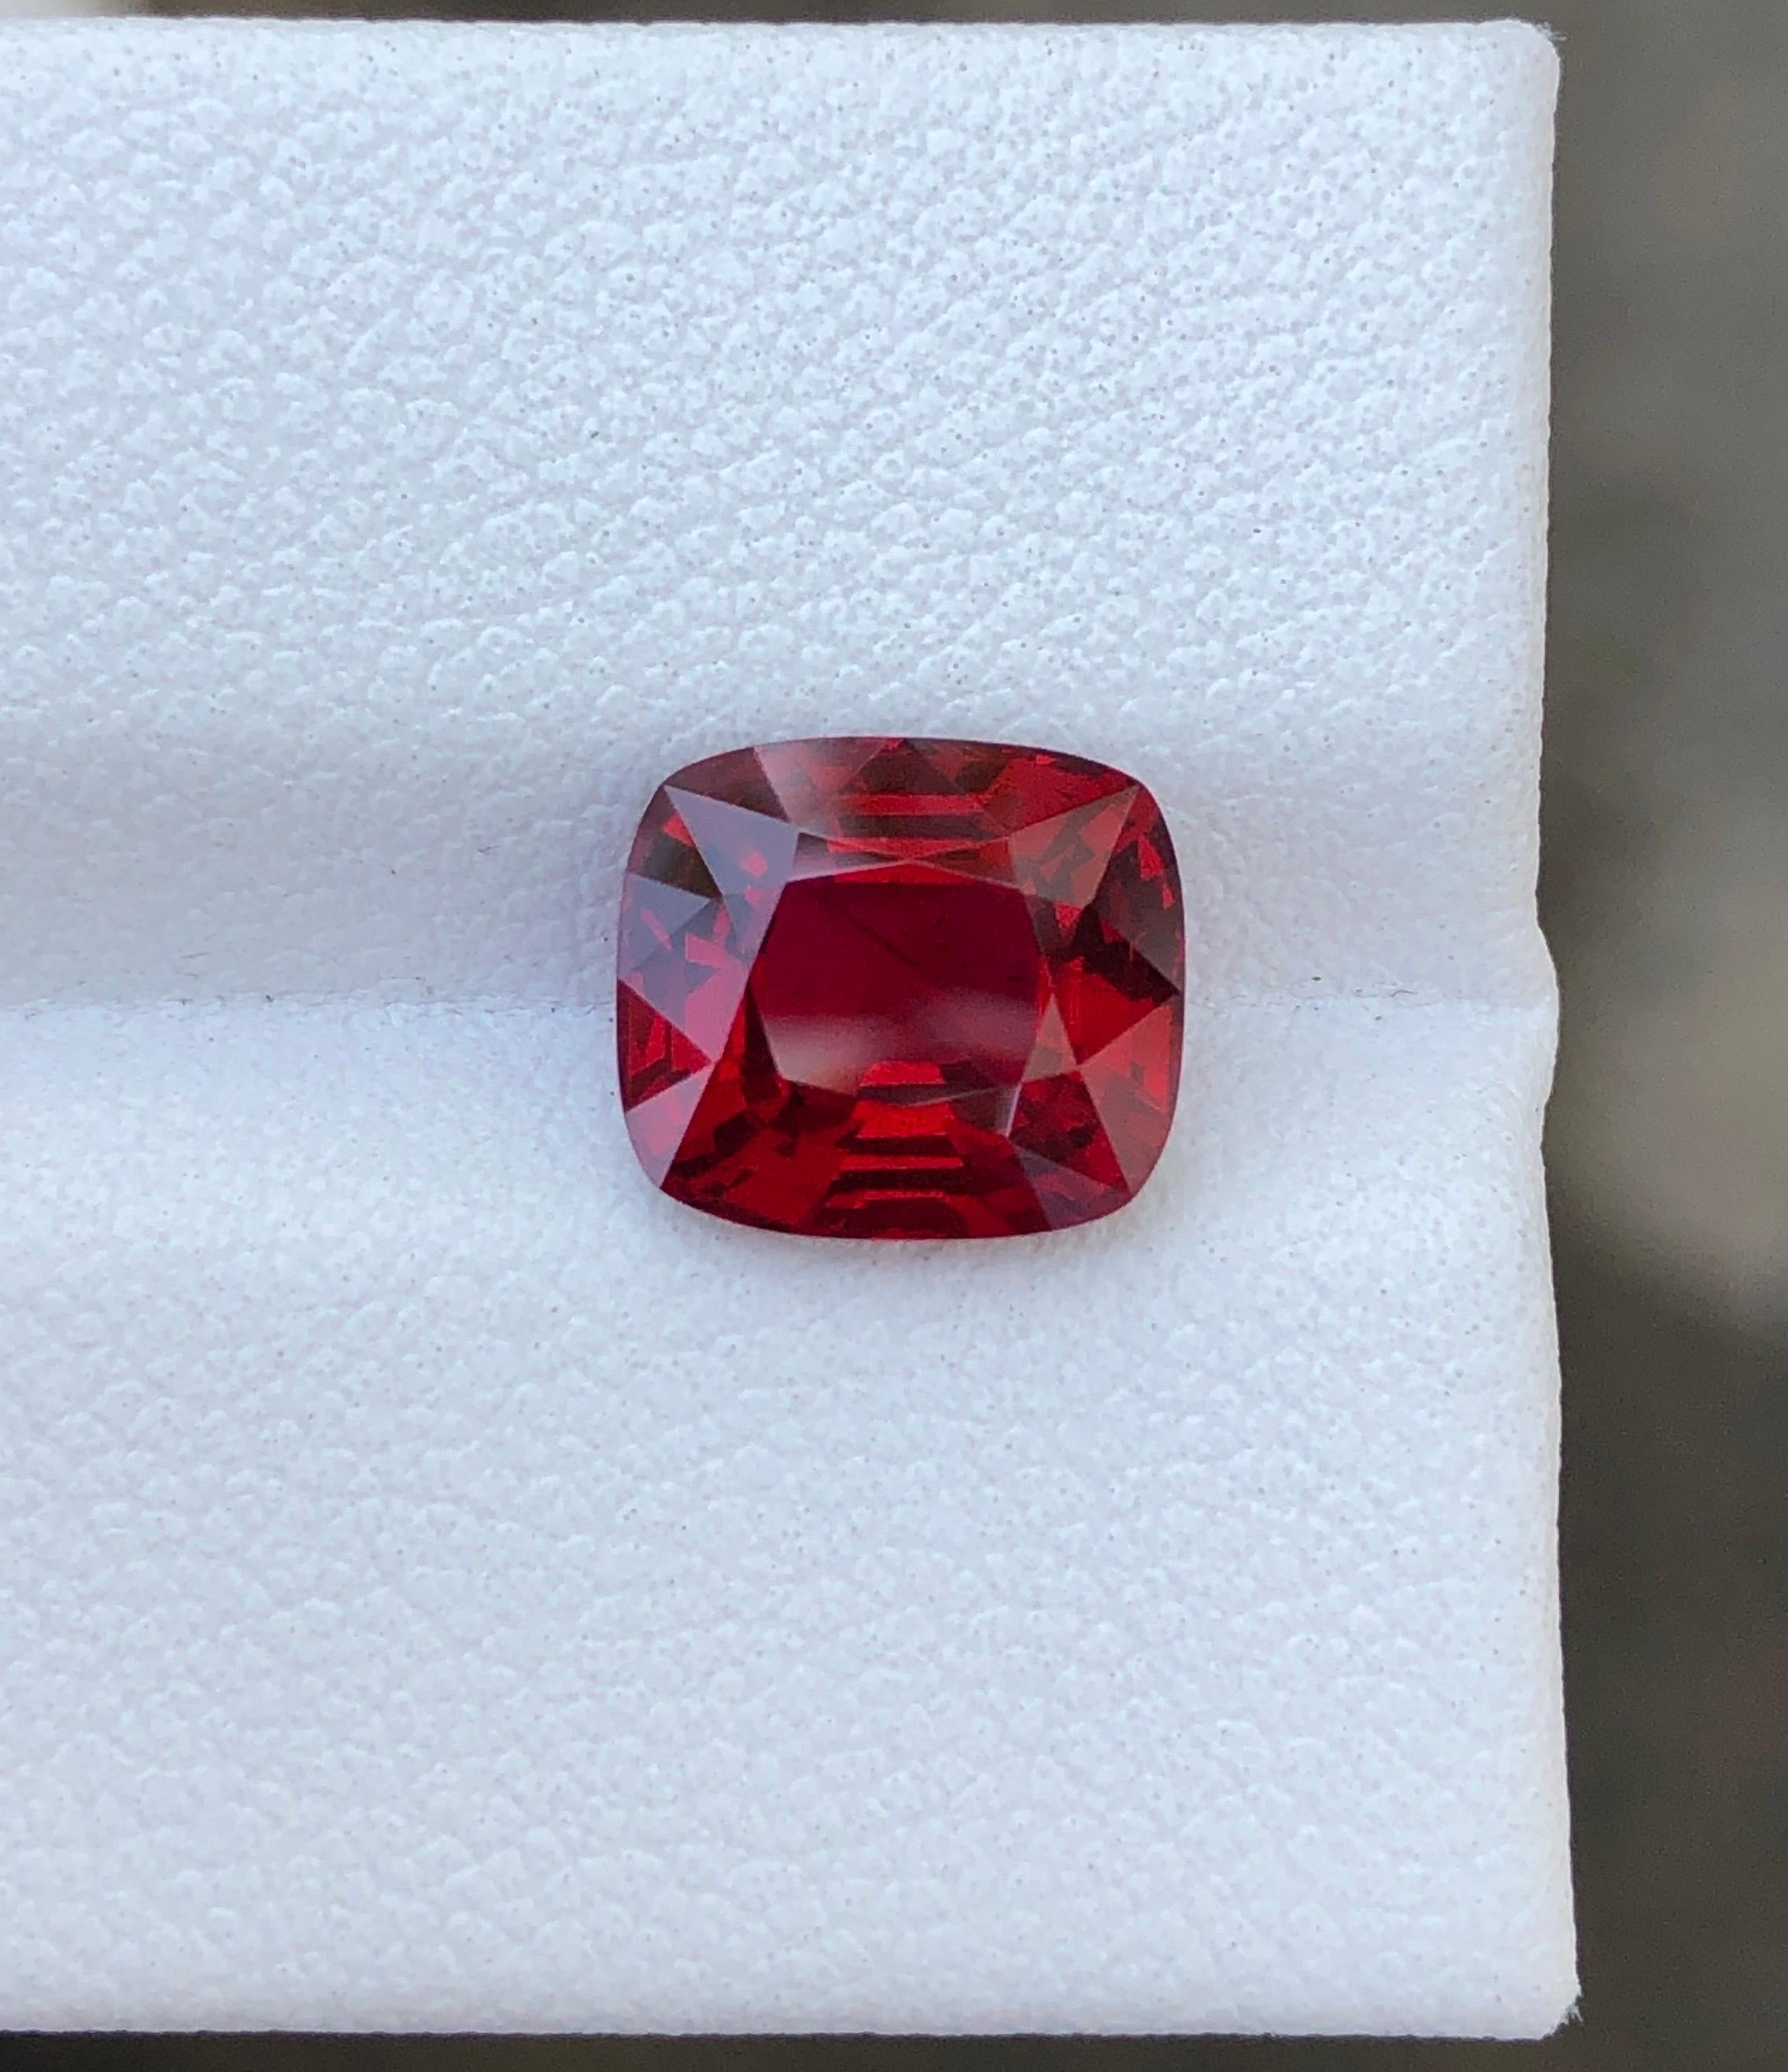 A true Vivid Red Spinel from Burma. The gemstone doesn’t have an orange tune doesn’t have a dark shade. It’s a vivid red spinel just like in the imagery/video. After a longtime I ve seen such a vivid open red spinel.
Or call it a pigeon Blood 🩸